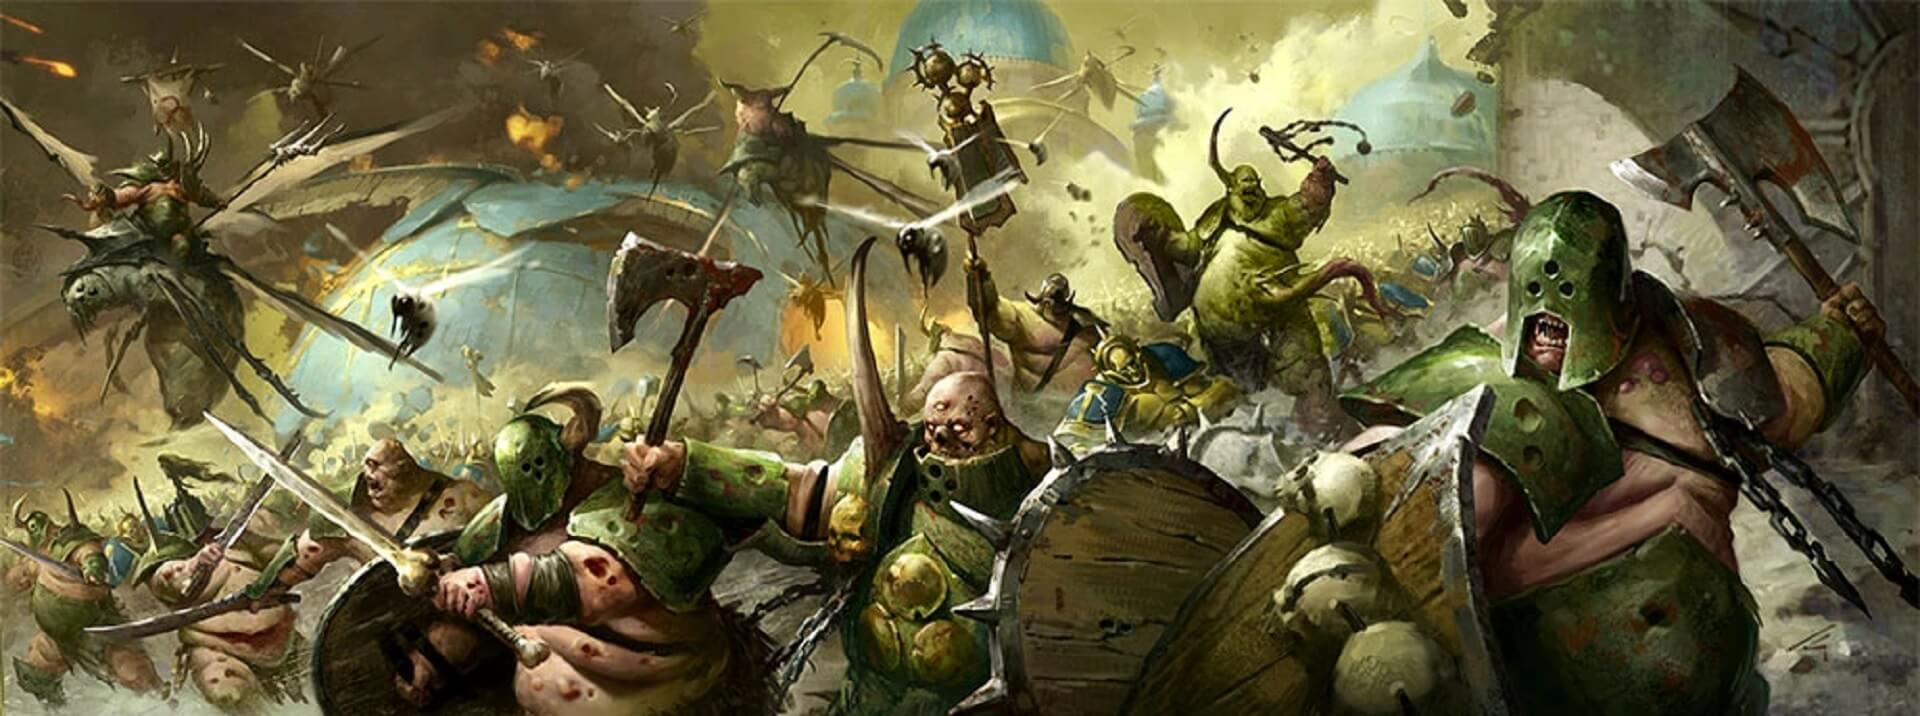 Age of Sigmar Maggotkin of Nurgle Preview